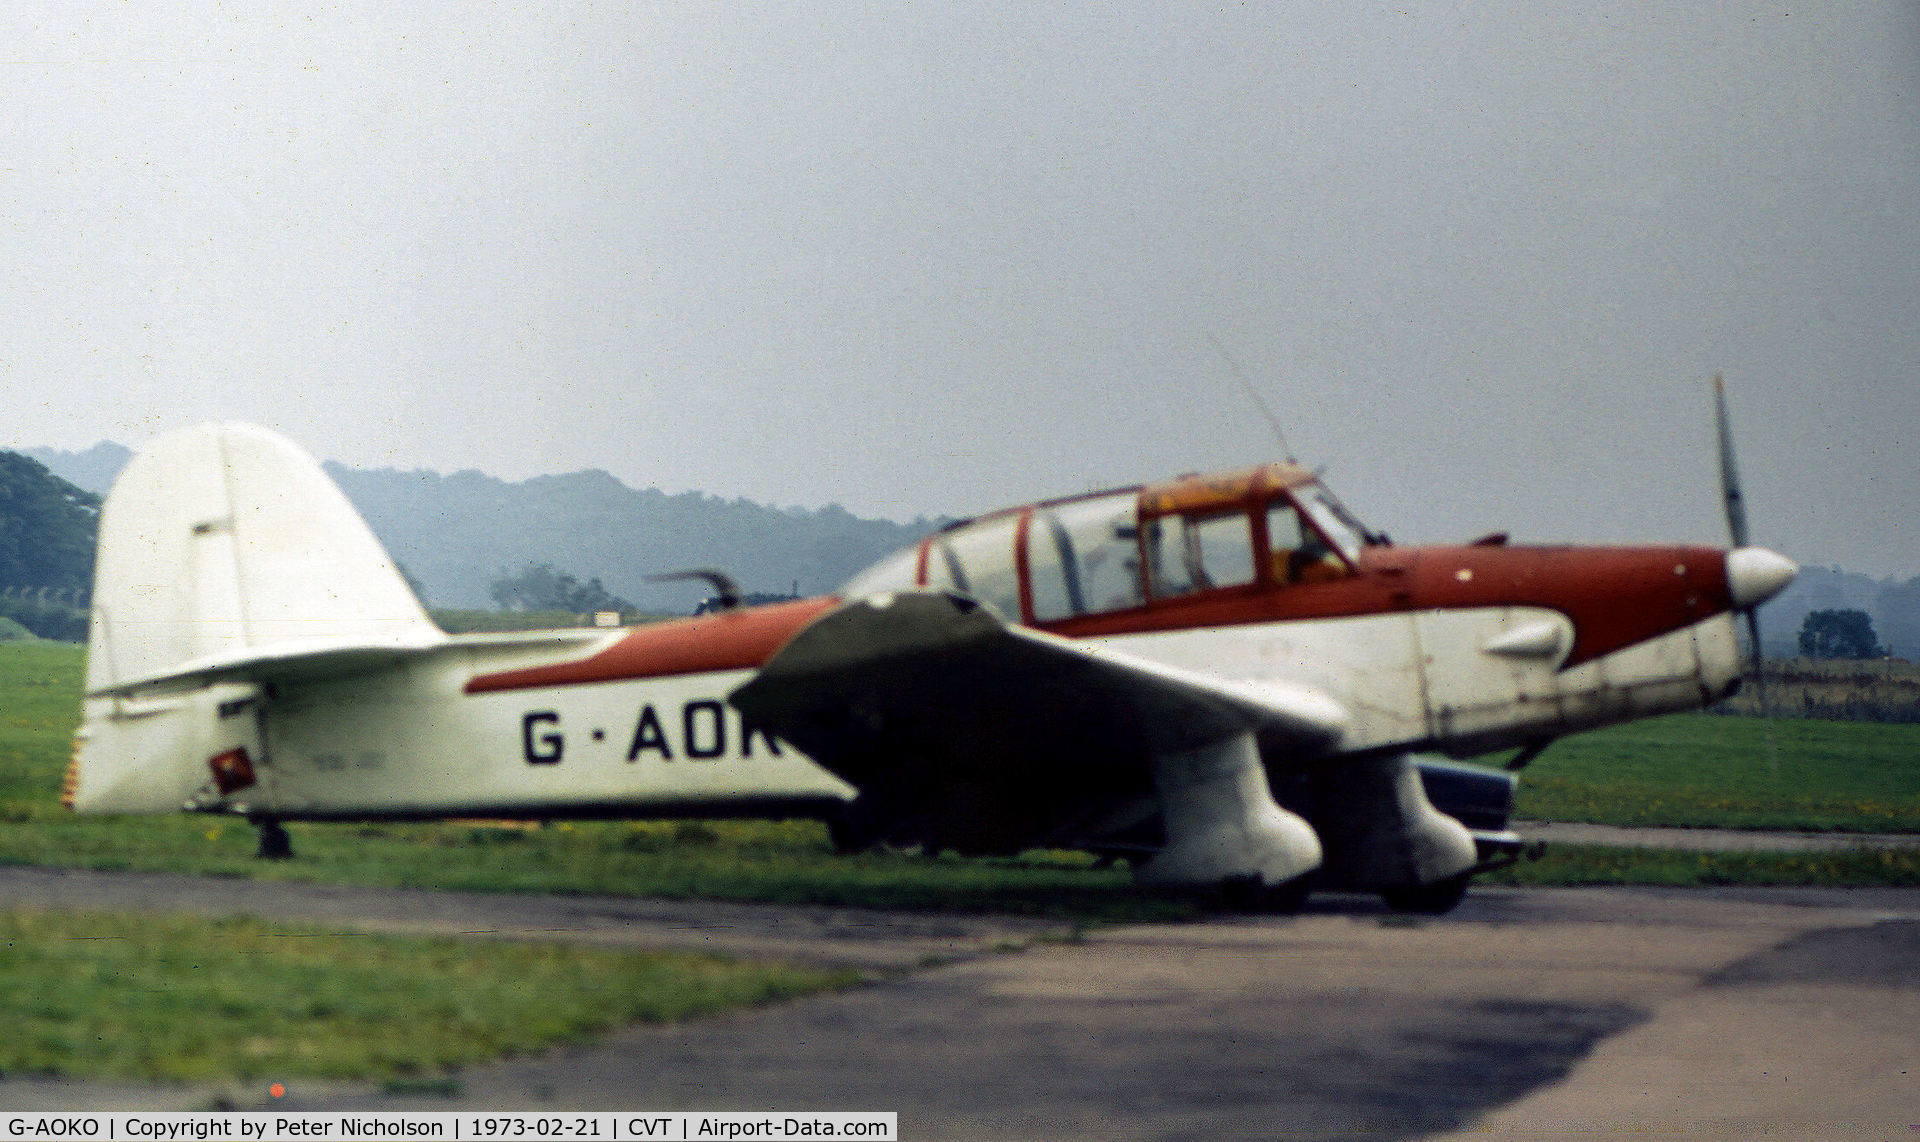 G-AOKO, 1949 Percival P40 Prentice T.1 C/N PAC-234, Percival Prentice T.1 as seen at Coventry in the Spring of 1973.